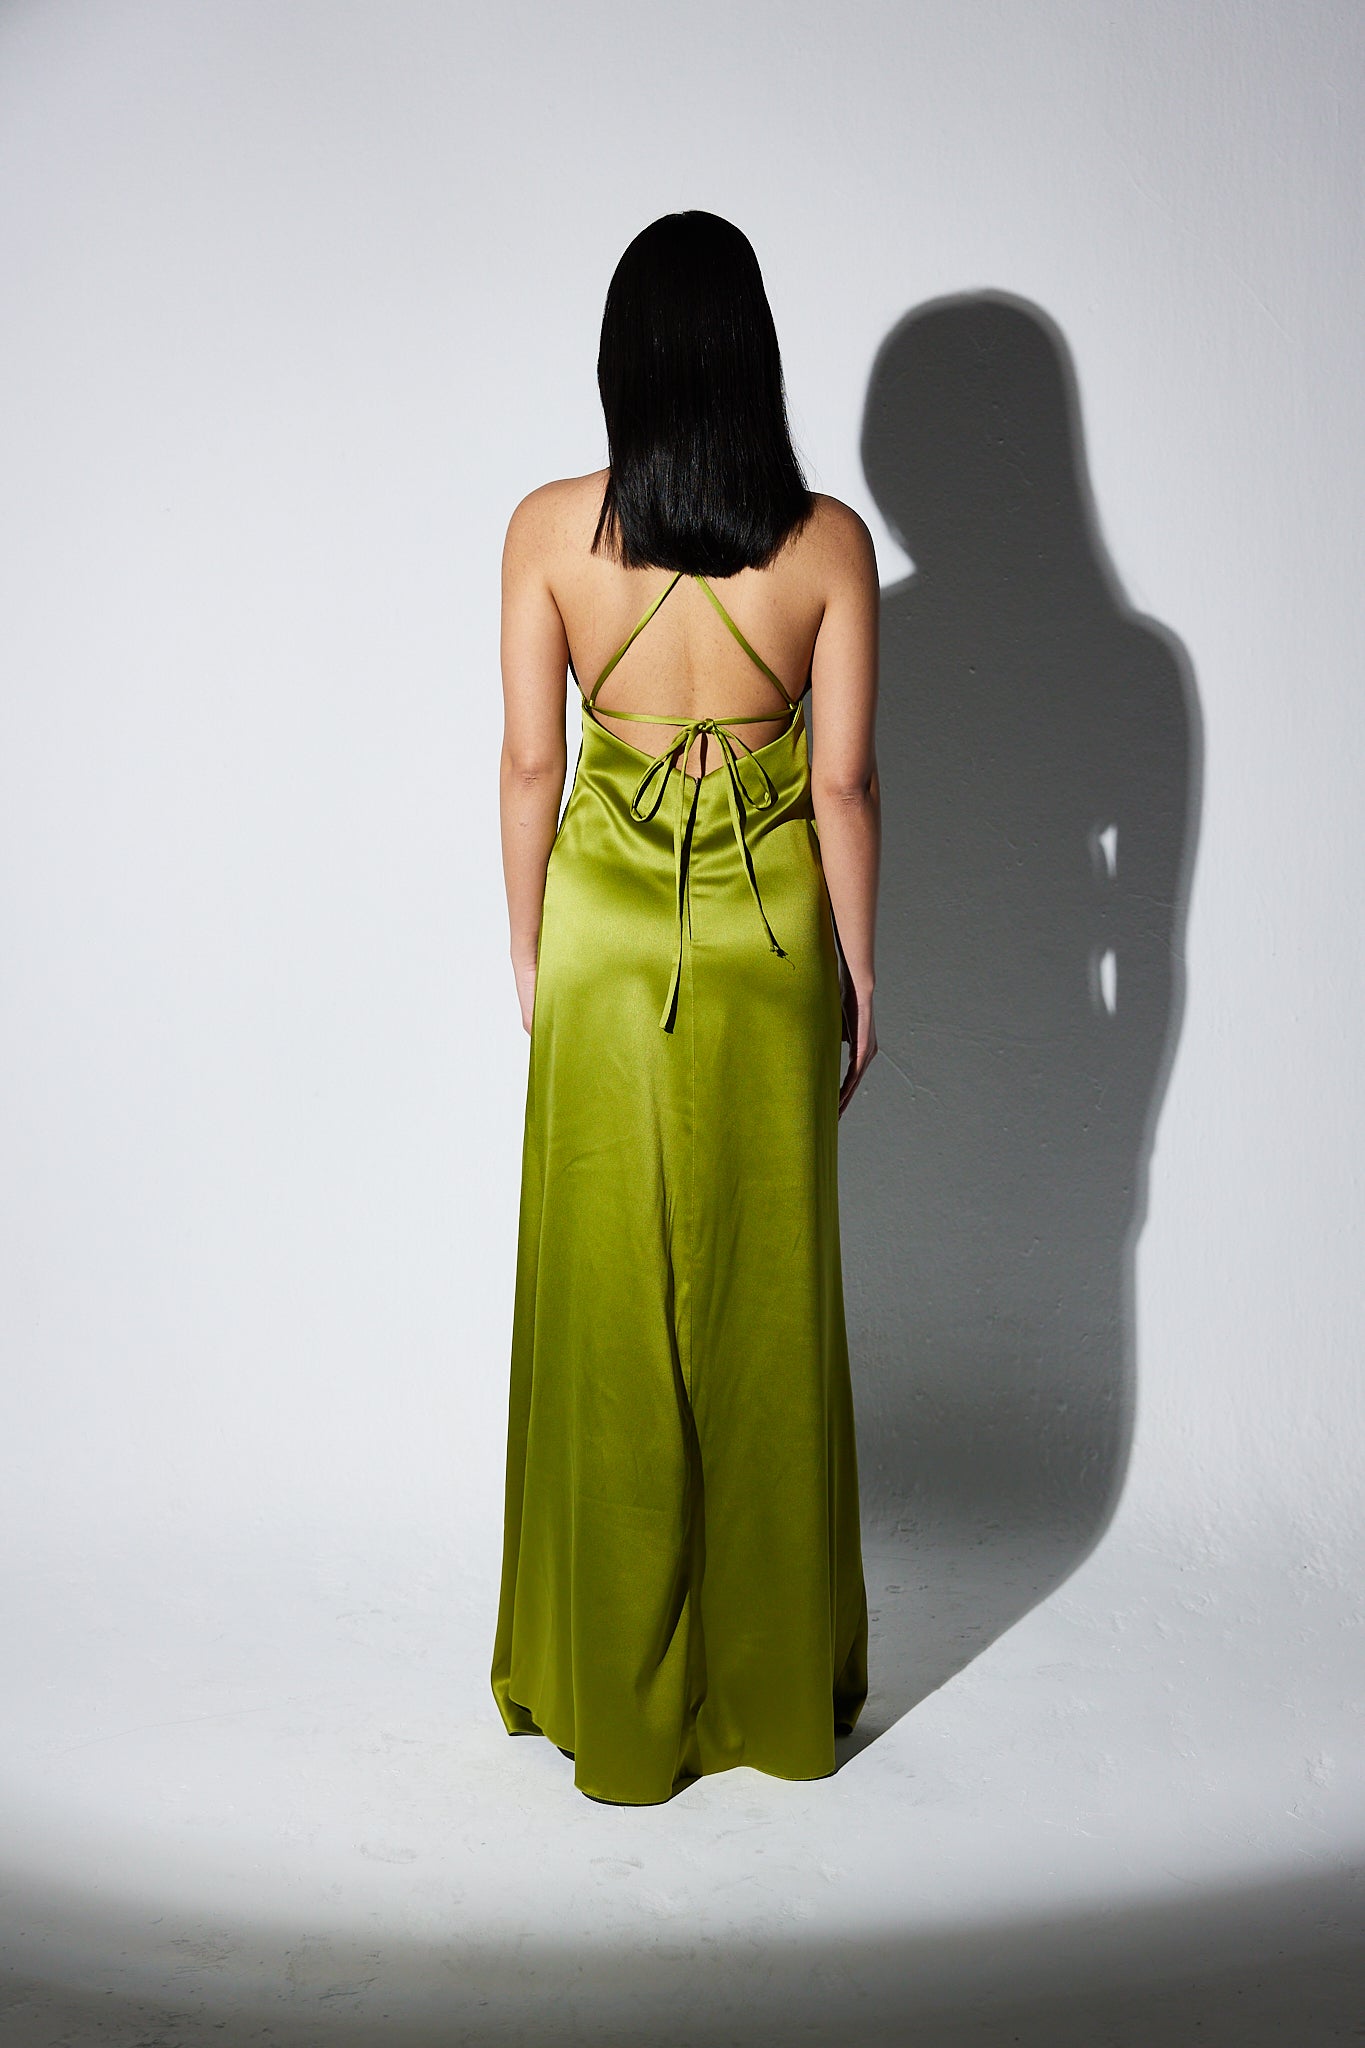 The Backless Satin in Lime Green